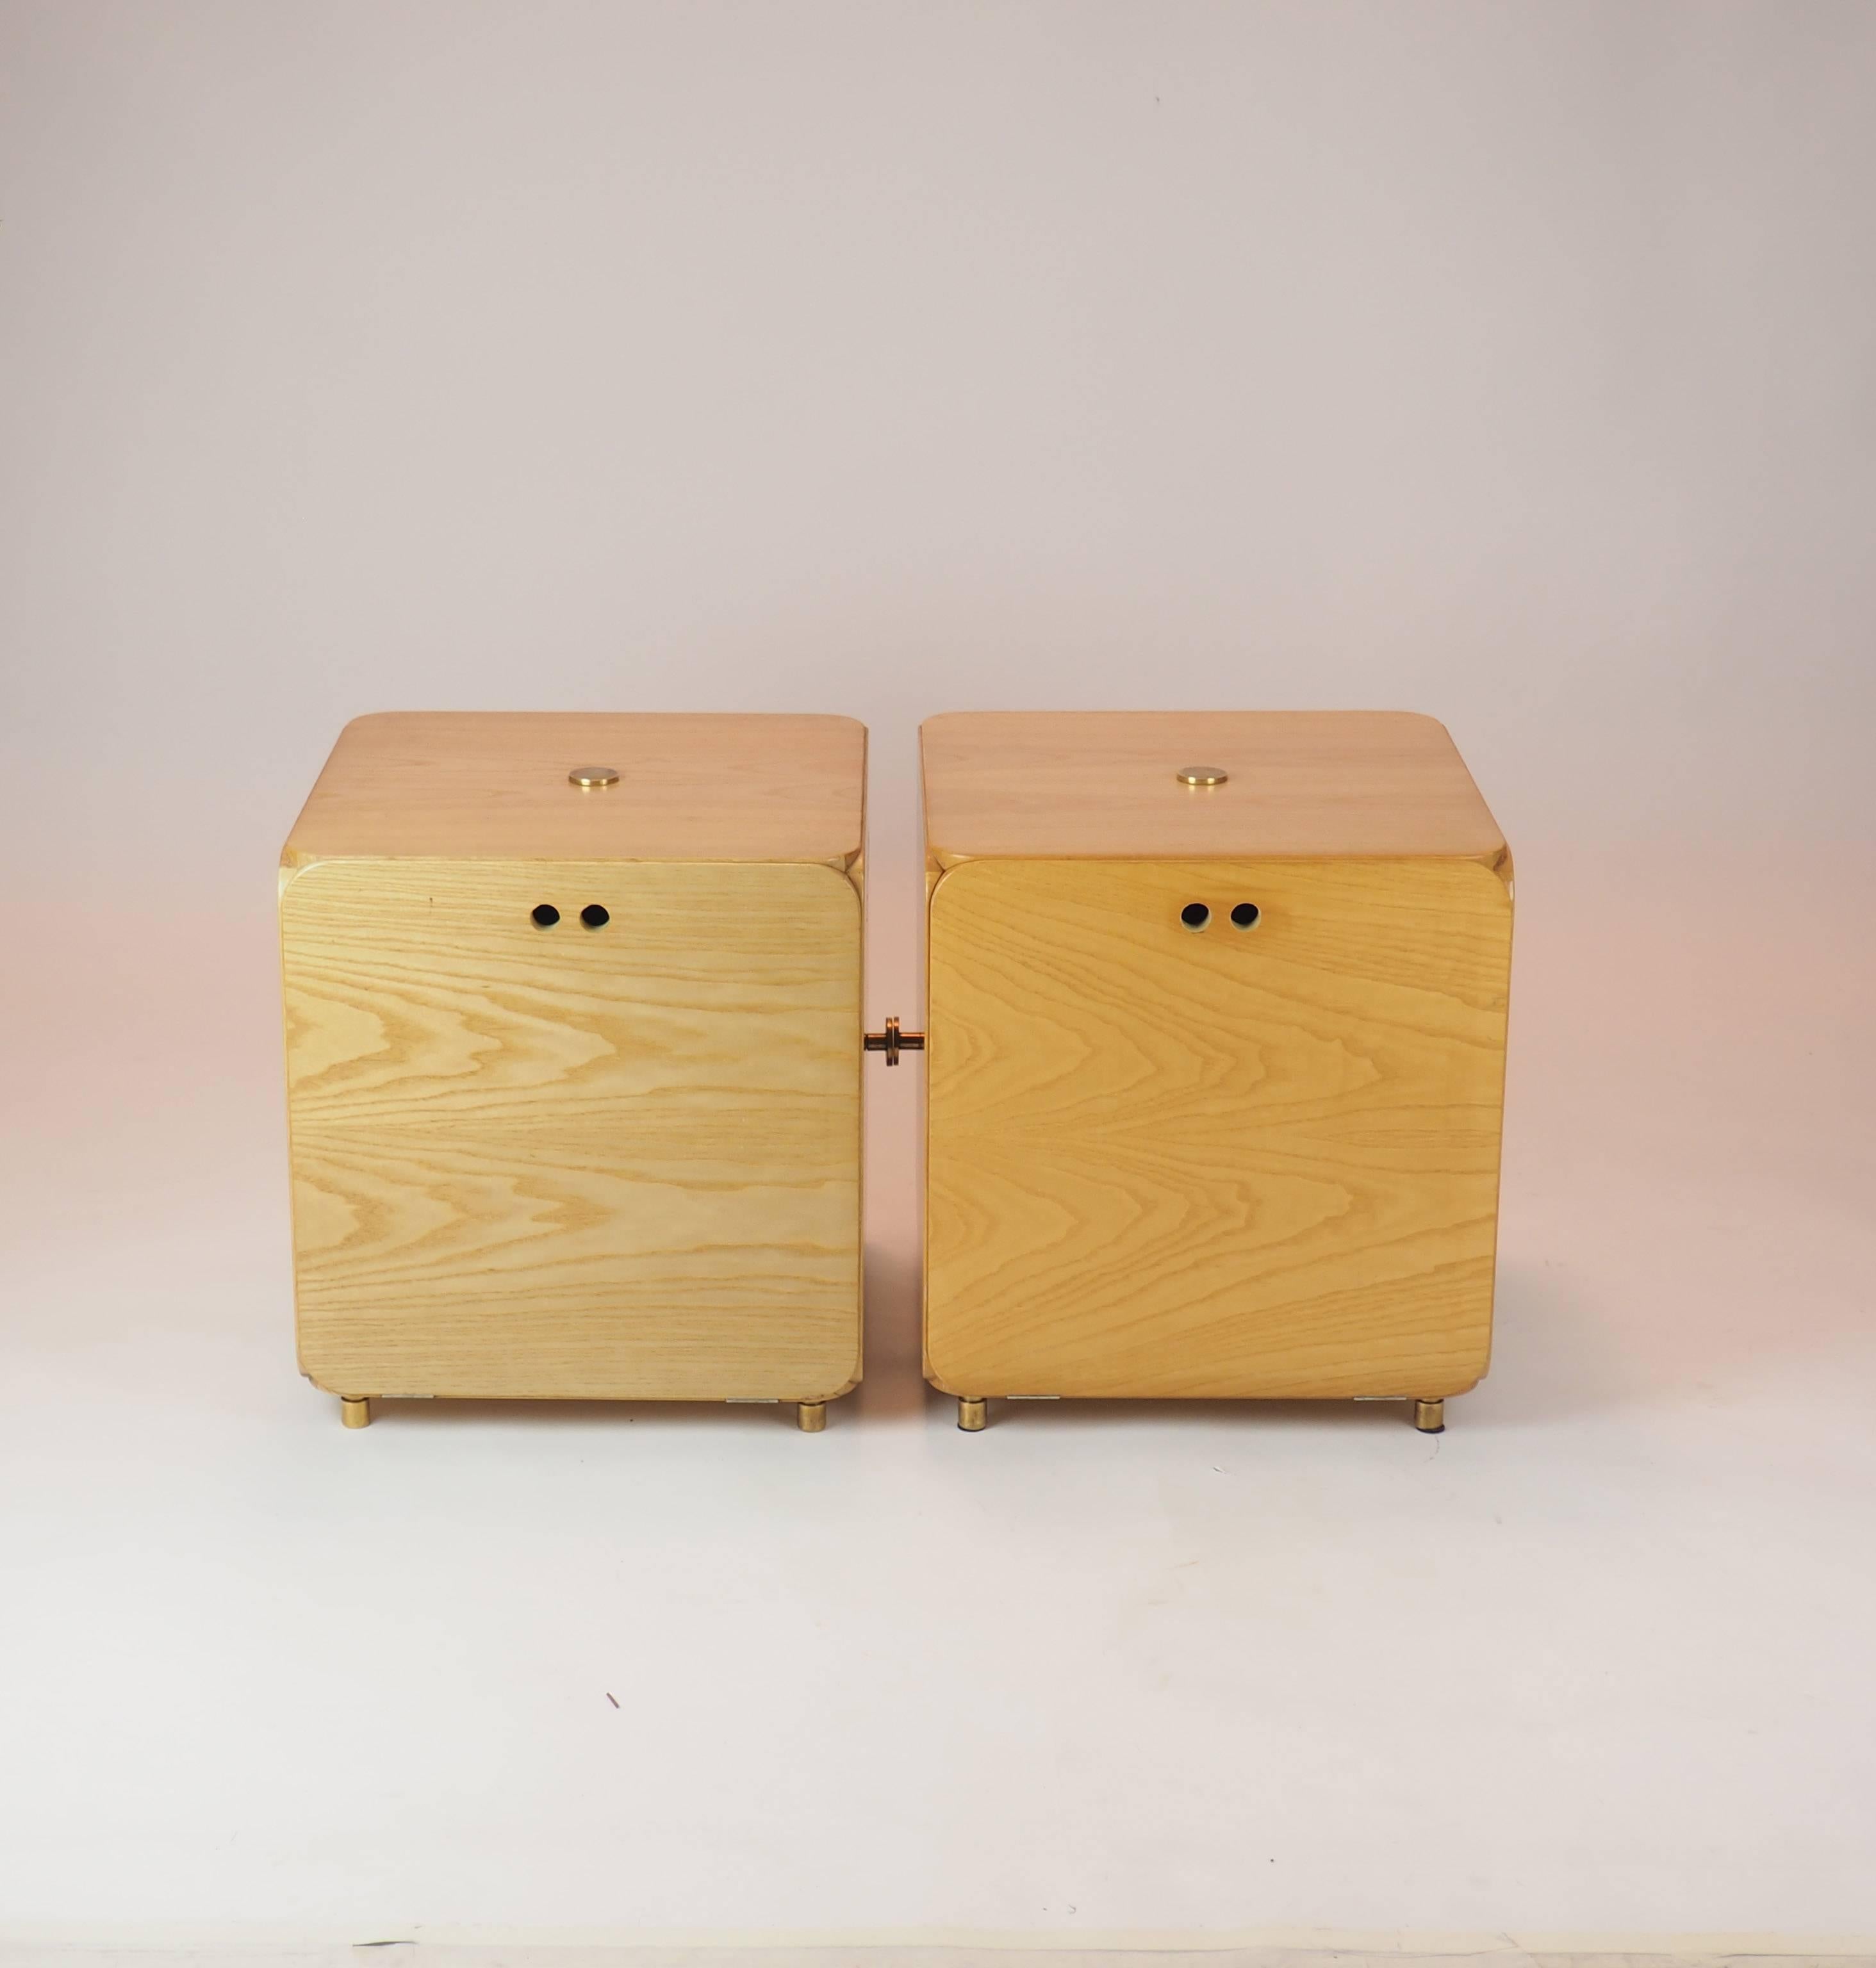 Ash Pair of  wood 'Cube' Cabinet  Nightstands Produced  in Italy by Maisa in  1969